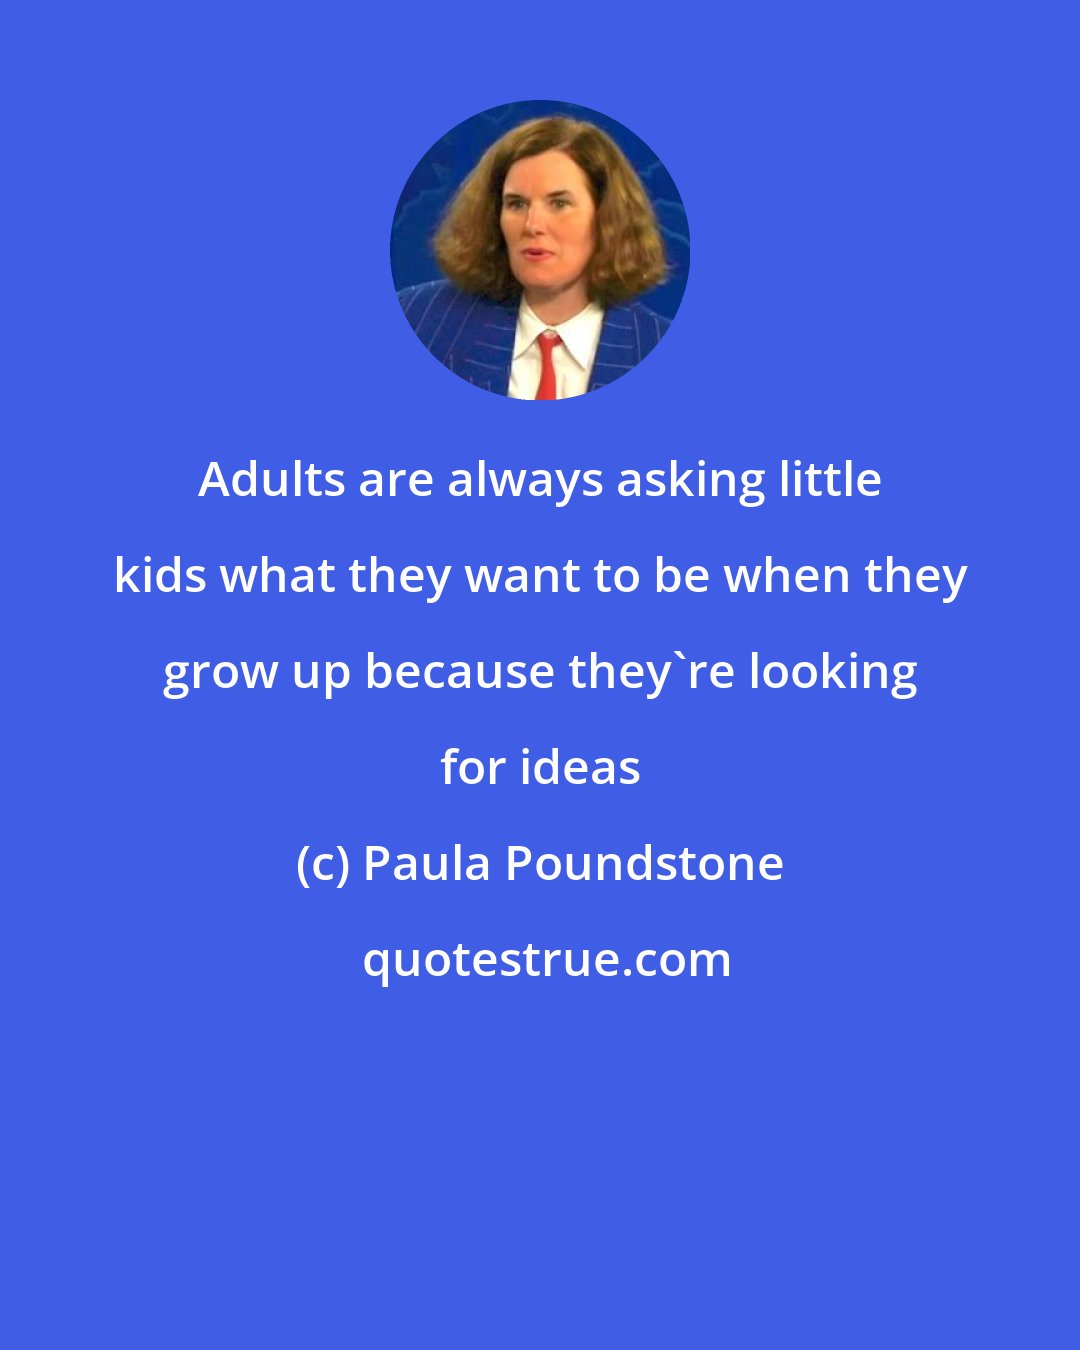 Paula Poundstone: Adults are always asking little kids what they want to be when they grow up because they're looking for ideas